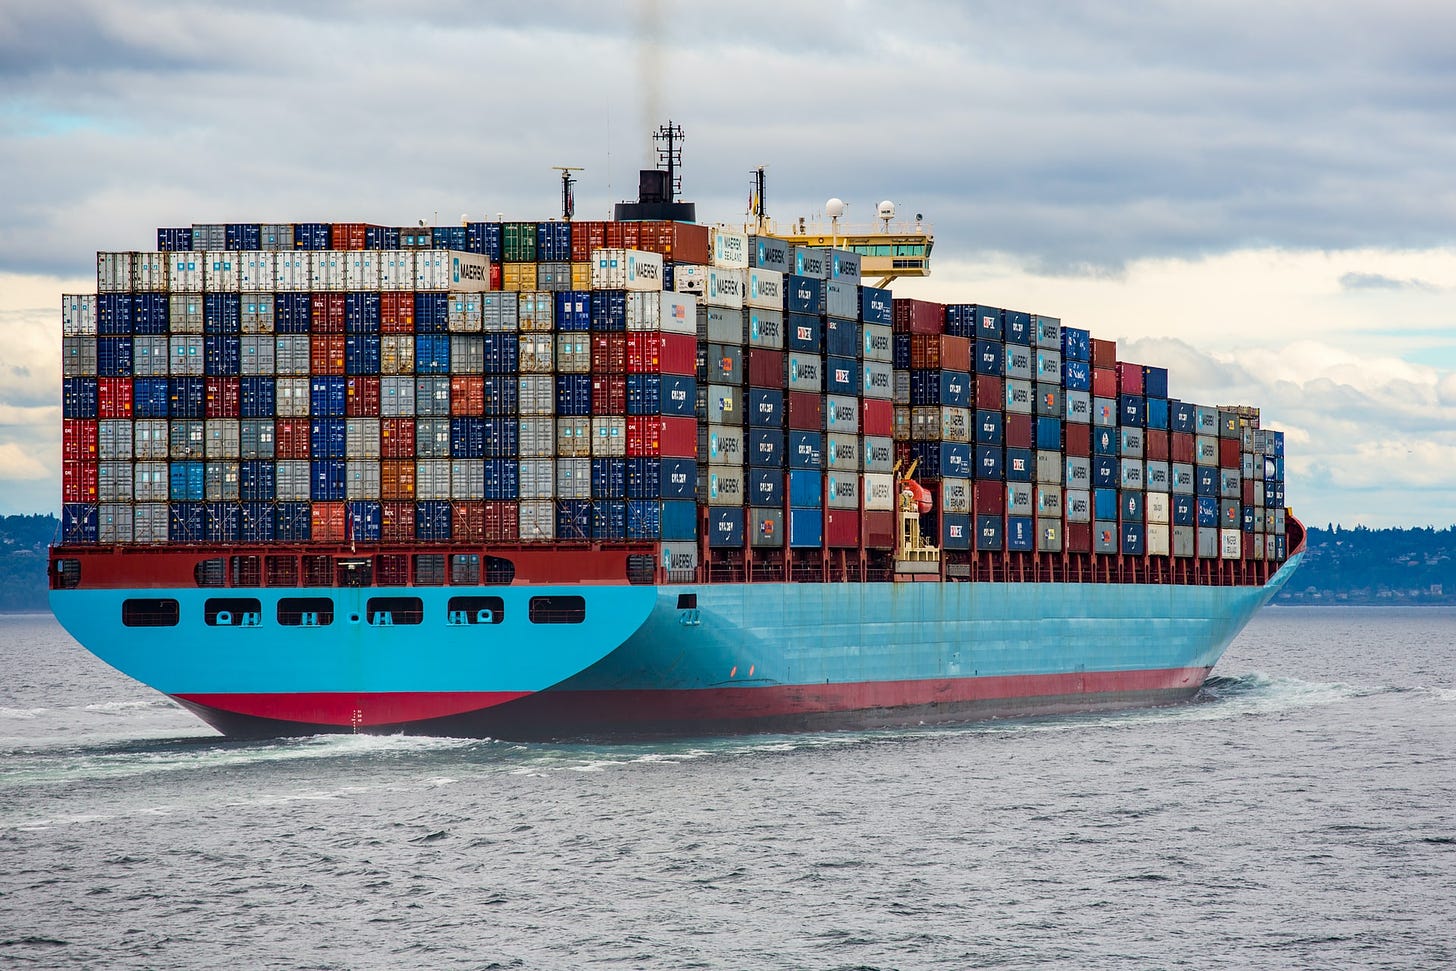 A large container ship is steaming away from the camera. The ship's base is painted sky blue, and blue, grey, red and yellow container rectangles are stacked up to eight containers high. A slight bit of smoke comes from a pipe floating up into a cloudy sky.